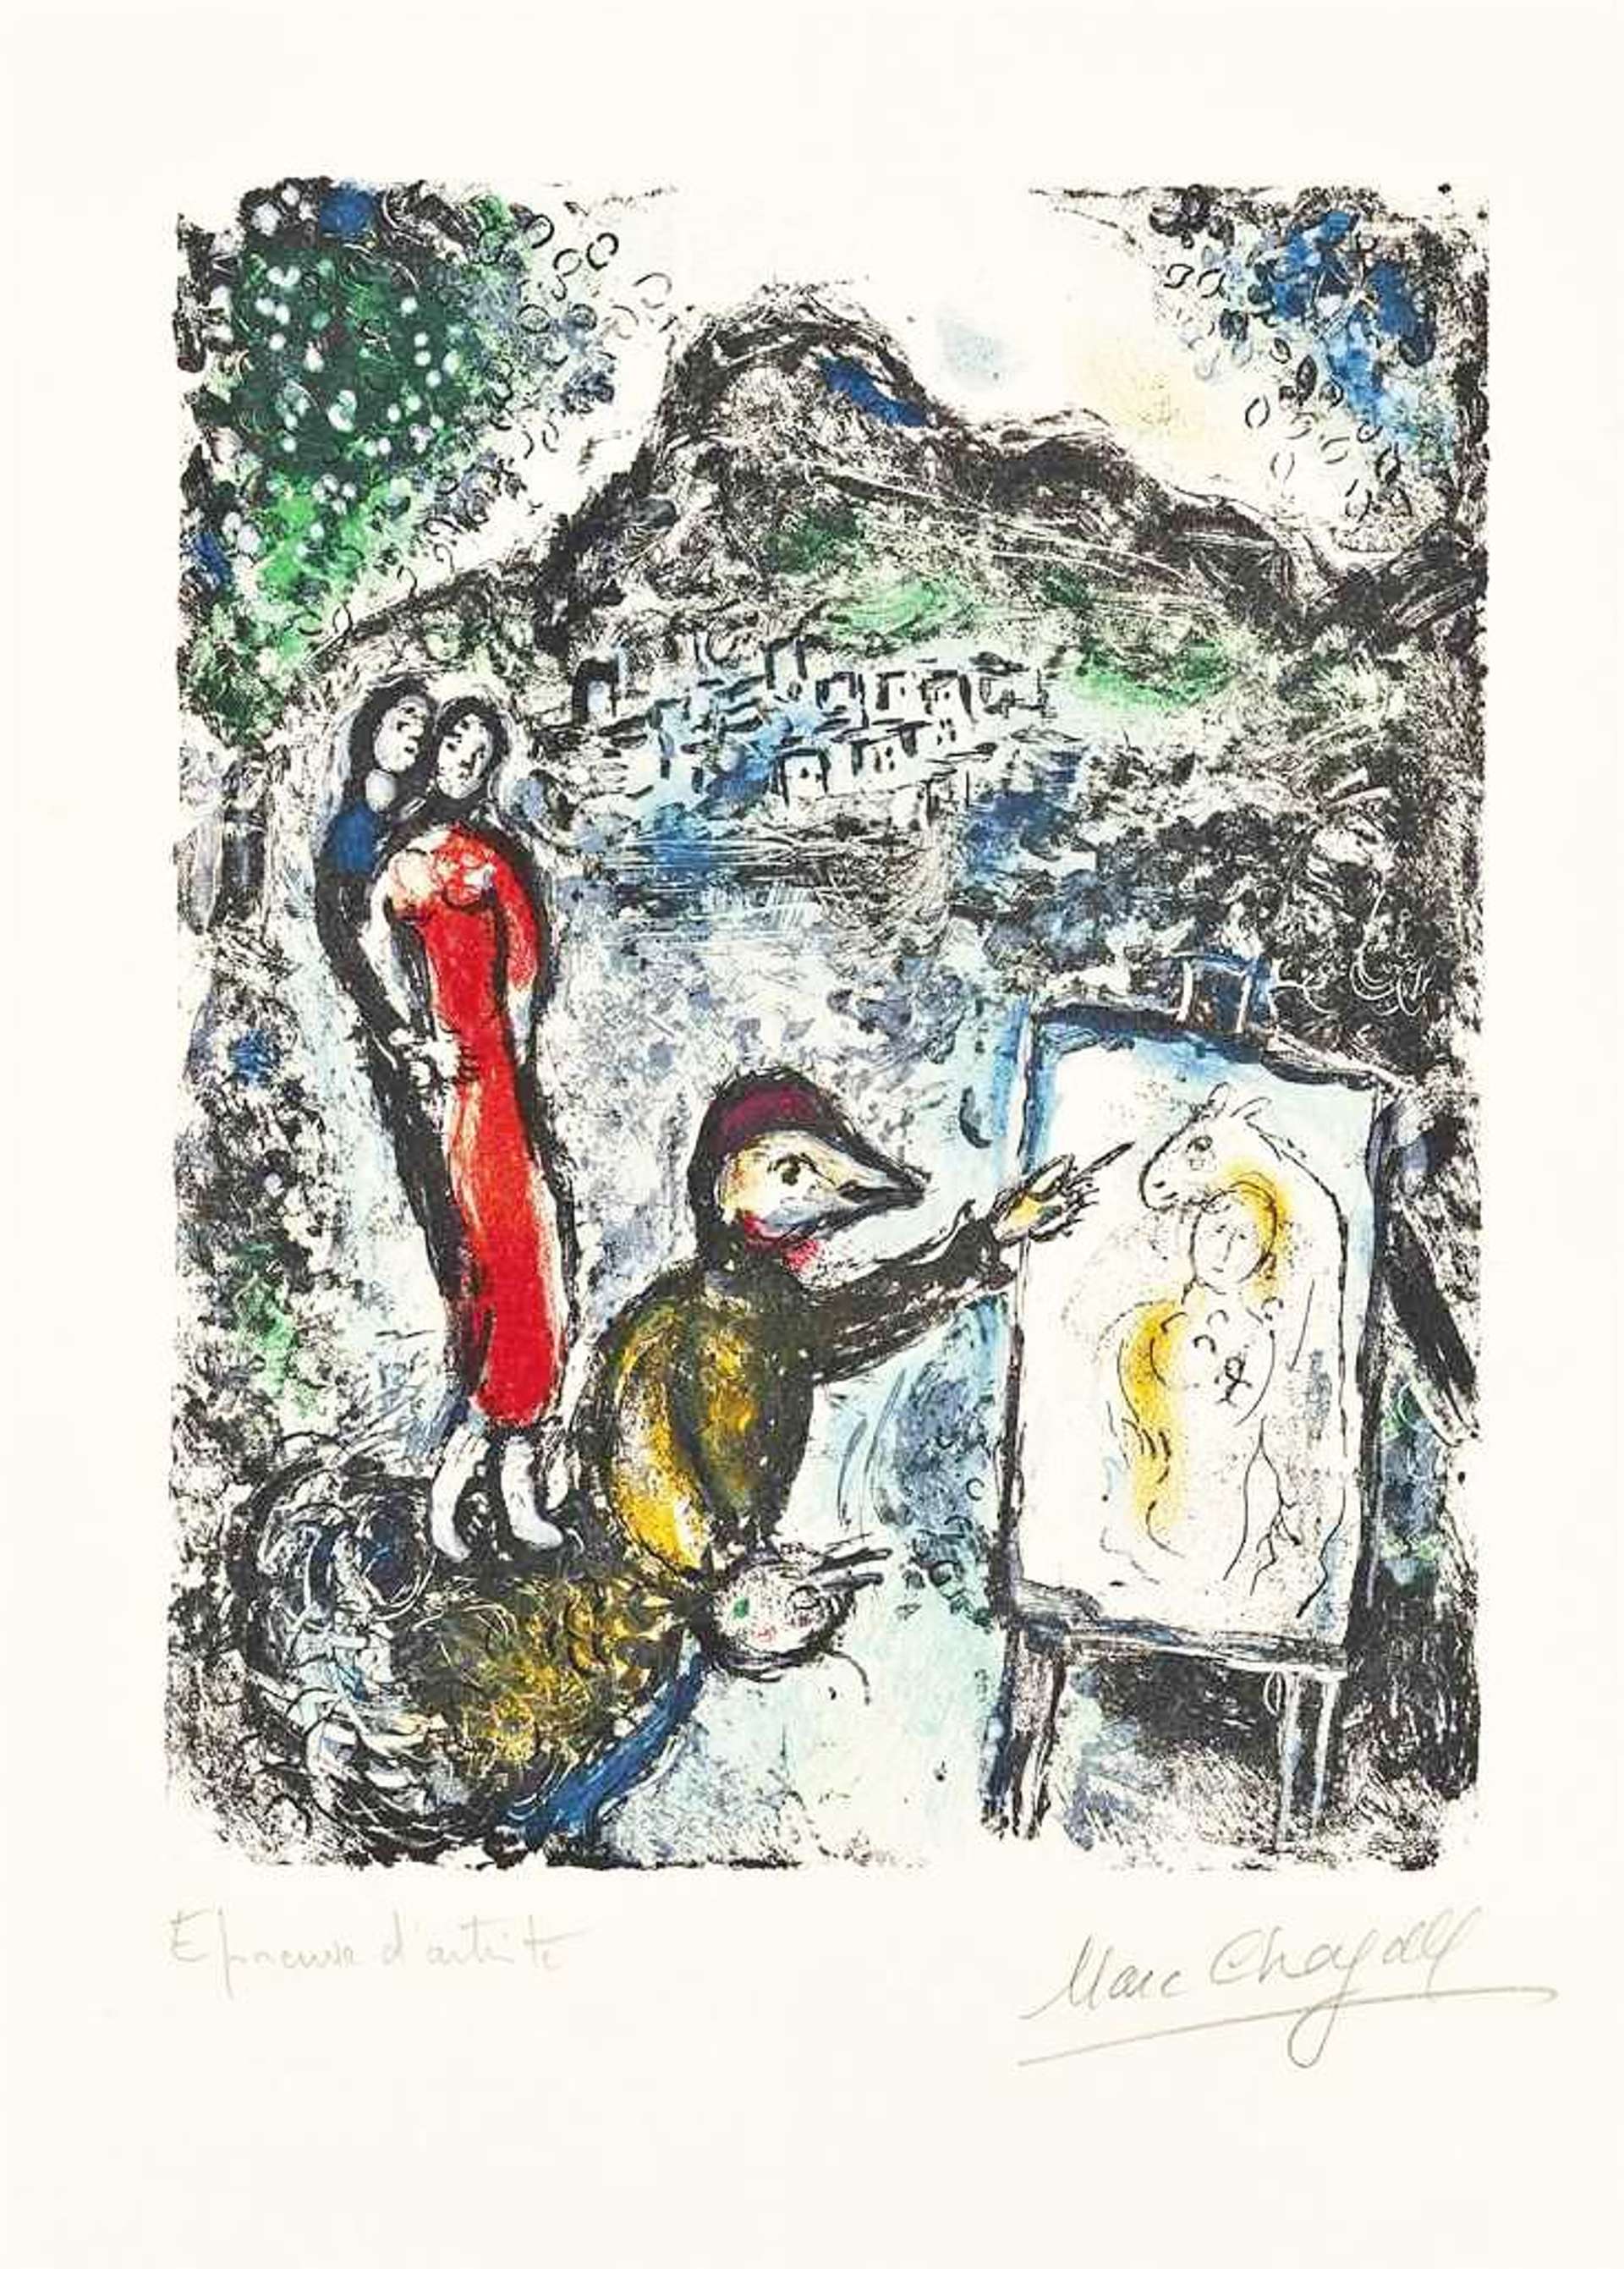 Marc Chagall: Devant St Jeannet - Signed Print